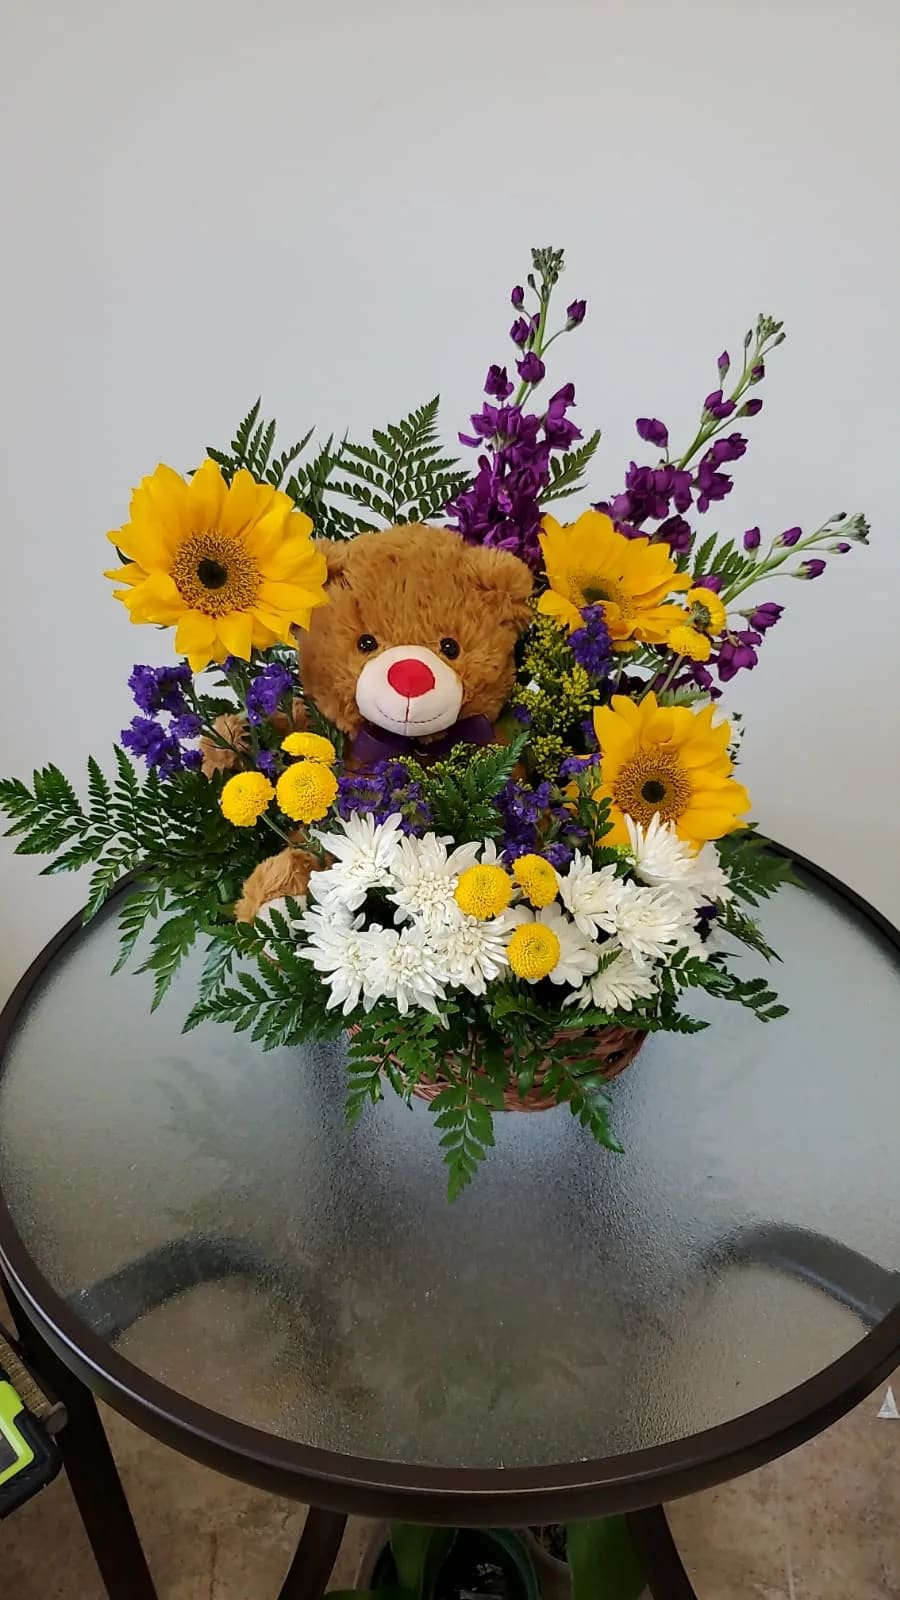 Spring Basket - Arrangement with sunflowers and a plush bear inside